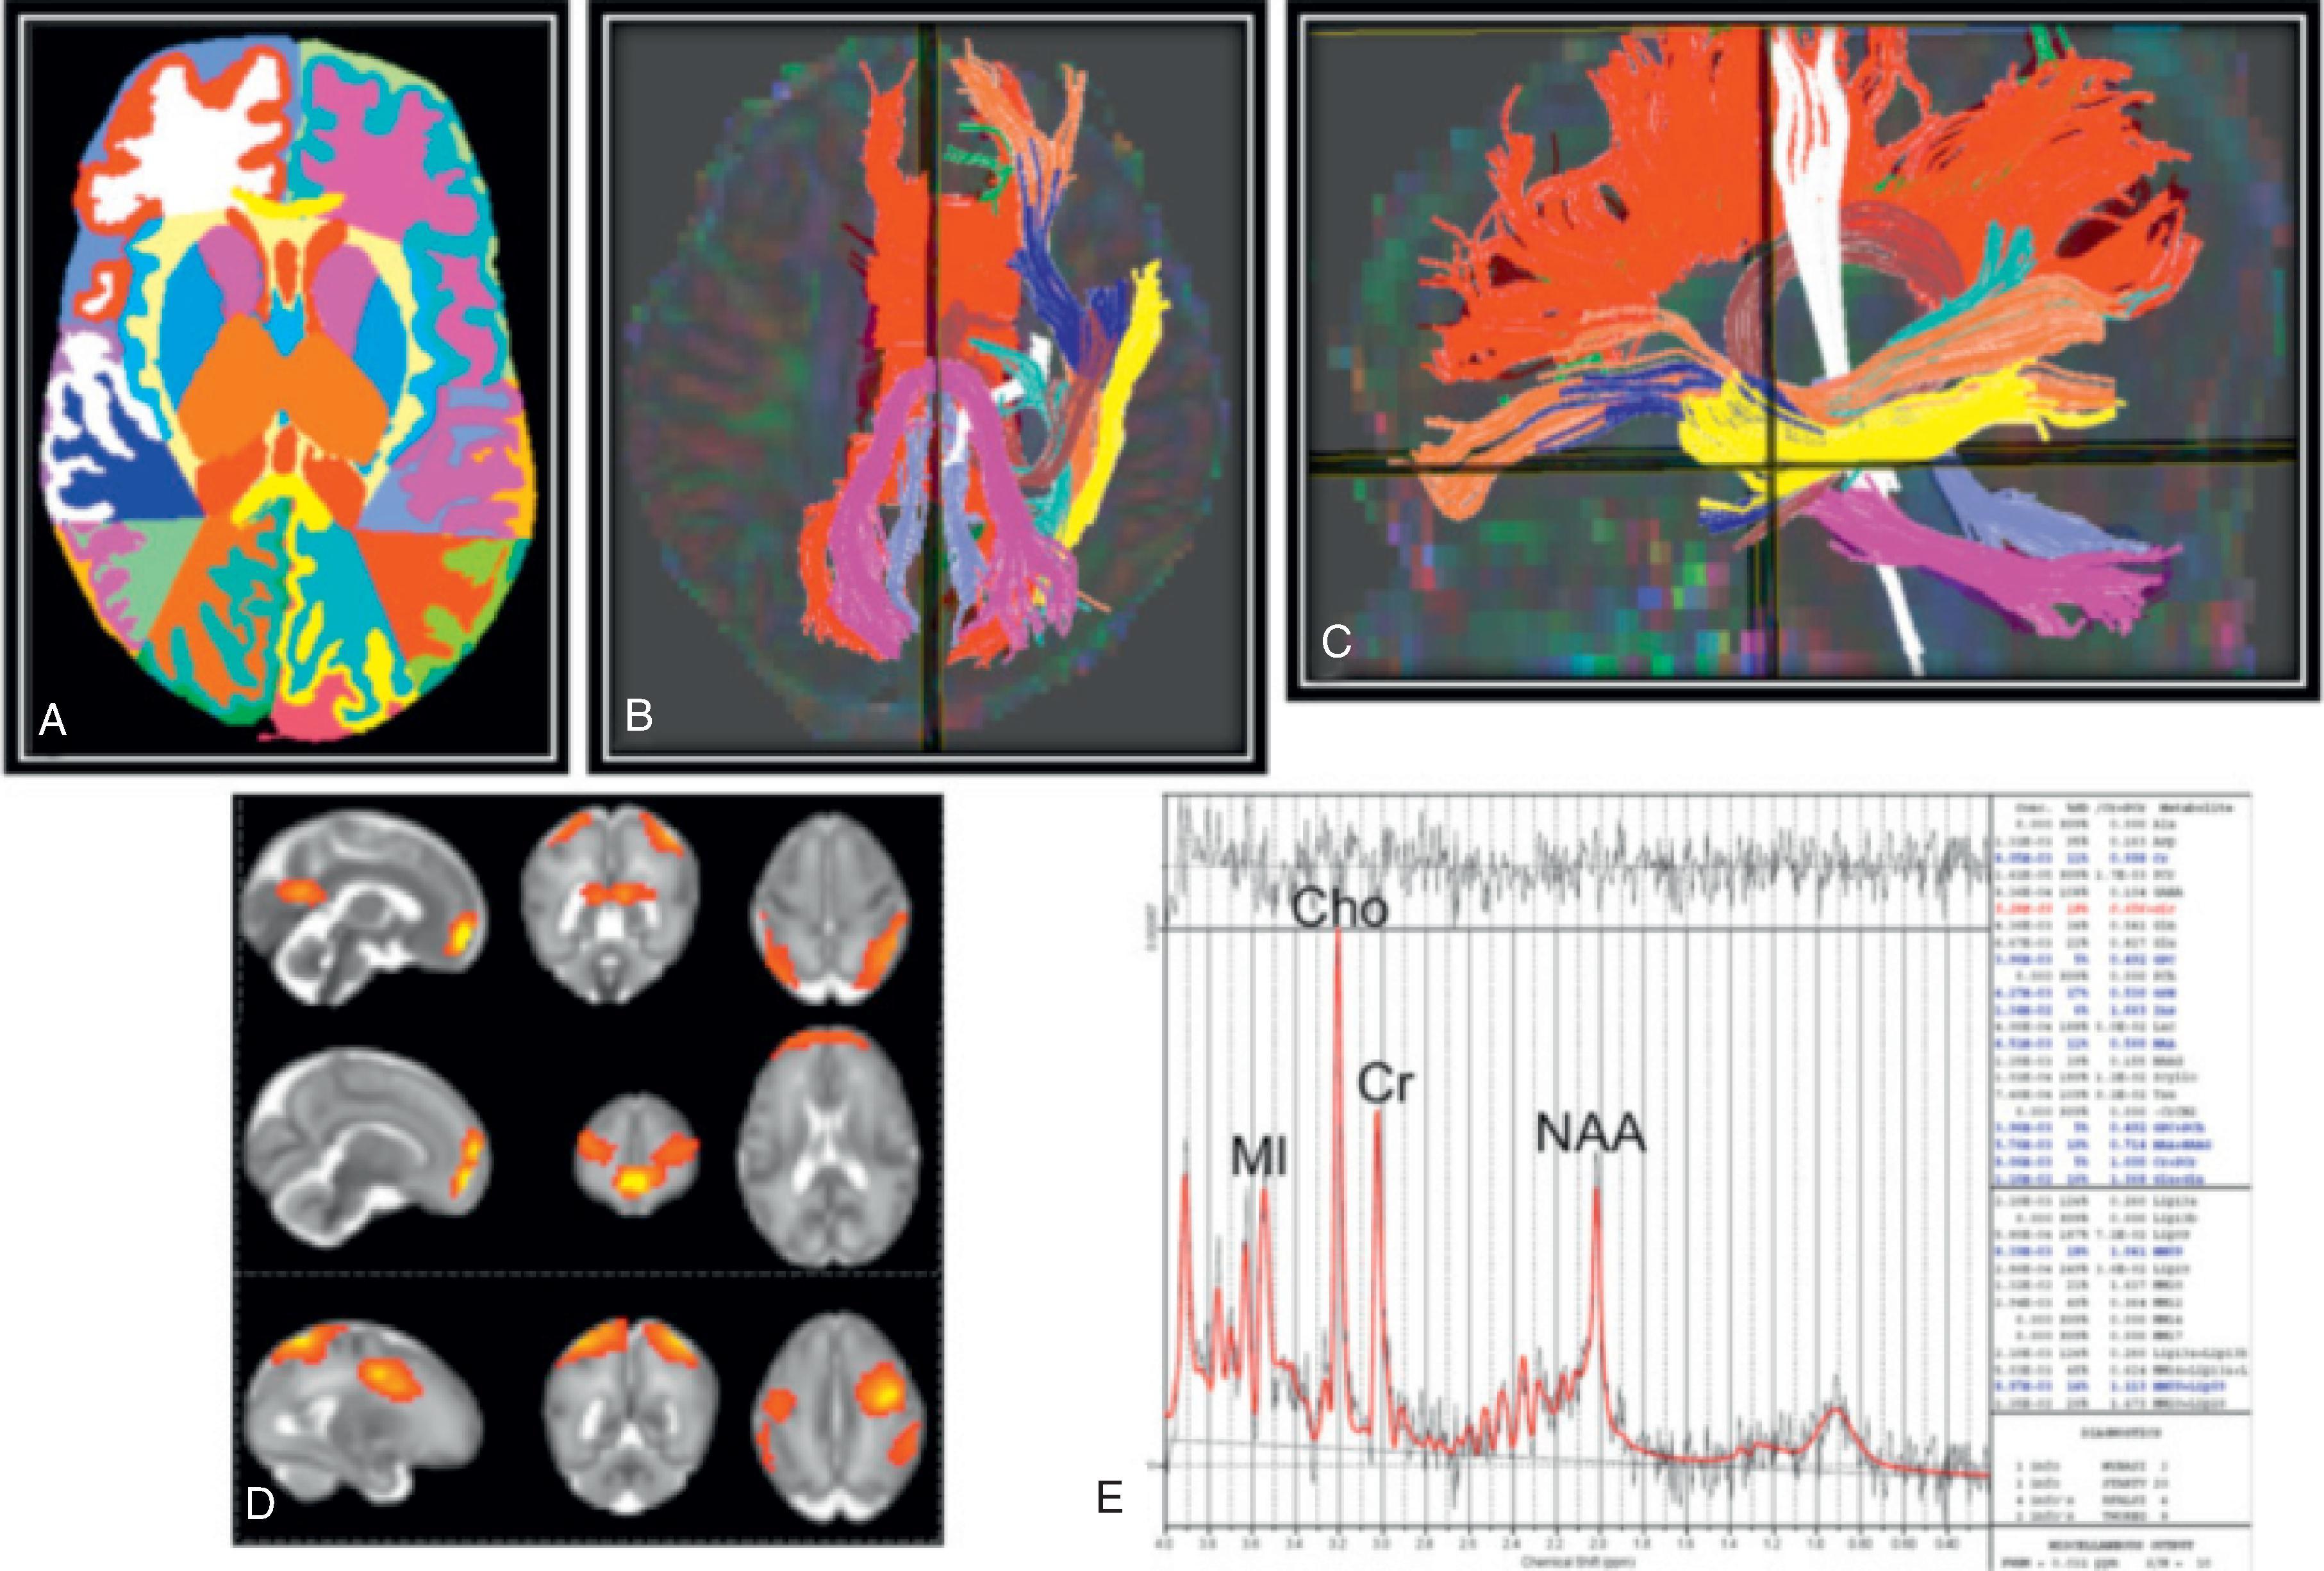 Fig. 96.1, (A) Brain-advanced magnetic resonance imaging (MRI) measurements including morphometry. (B and C) Diffusion tractography. (D) Functional connectivity MRI. (E) Magnetic resonance spectroscopy. Representative advanced MRI examples of an extremely low birth weight infant's brain at term-equivalent age display that was segmented into tissue classes, subcortical structures, and lobes (A); 10 white matter tracts, displayed in axial and sagittal orientations (B and C); panel D shows blood-oxygen level–dependent activations in the default mode (top panel), executive control (middle panel), and frontoparietal networks (bottom panel); and panel E is a processed proton magnetic resonance spectroscopy spectrum displaying the four main metabolites, including N-acetylaspartate (NAA), creatine (Cr), choline (Cho), and myo-inositol (MI).